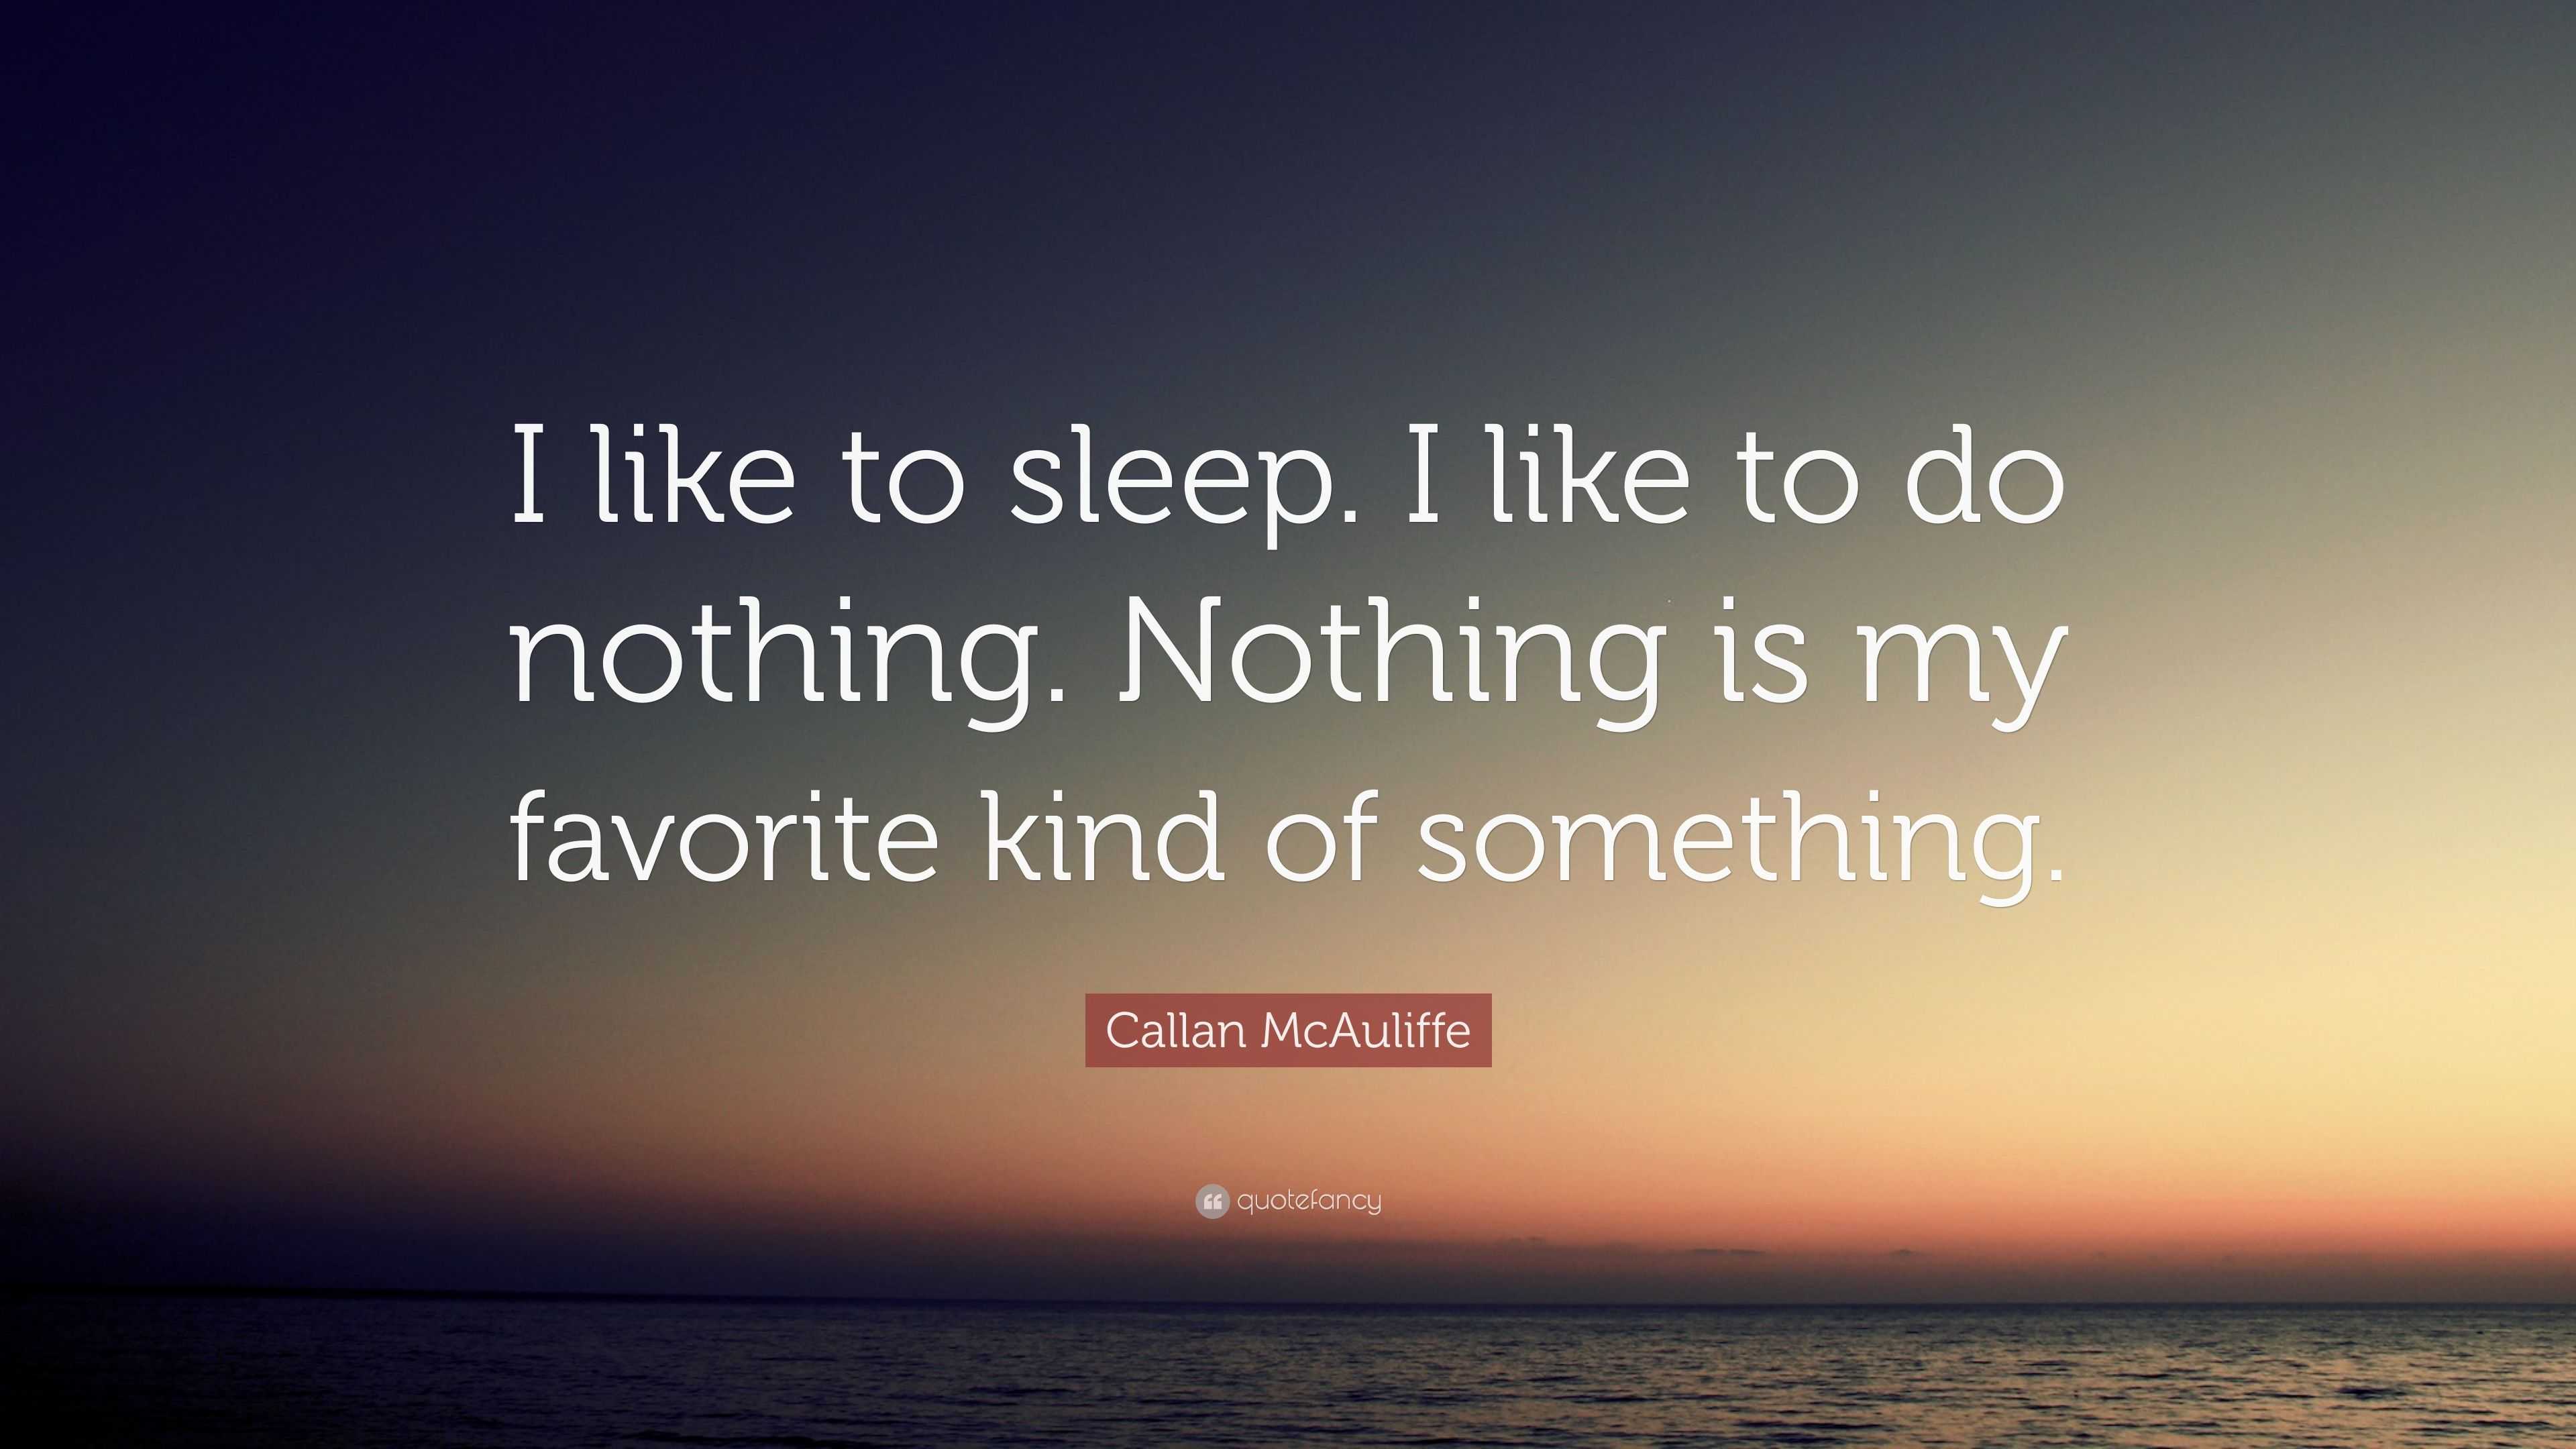 Like to Do Nothing 